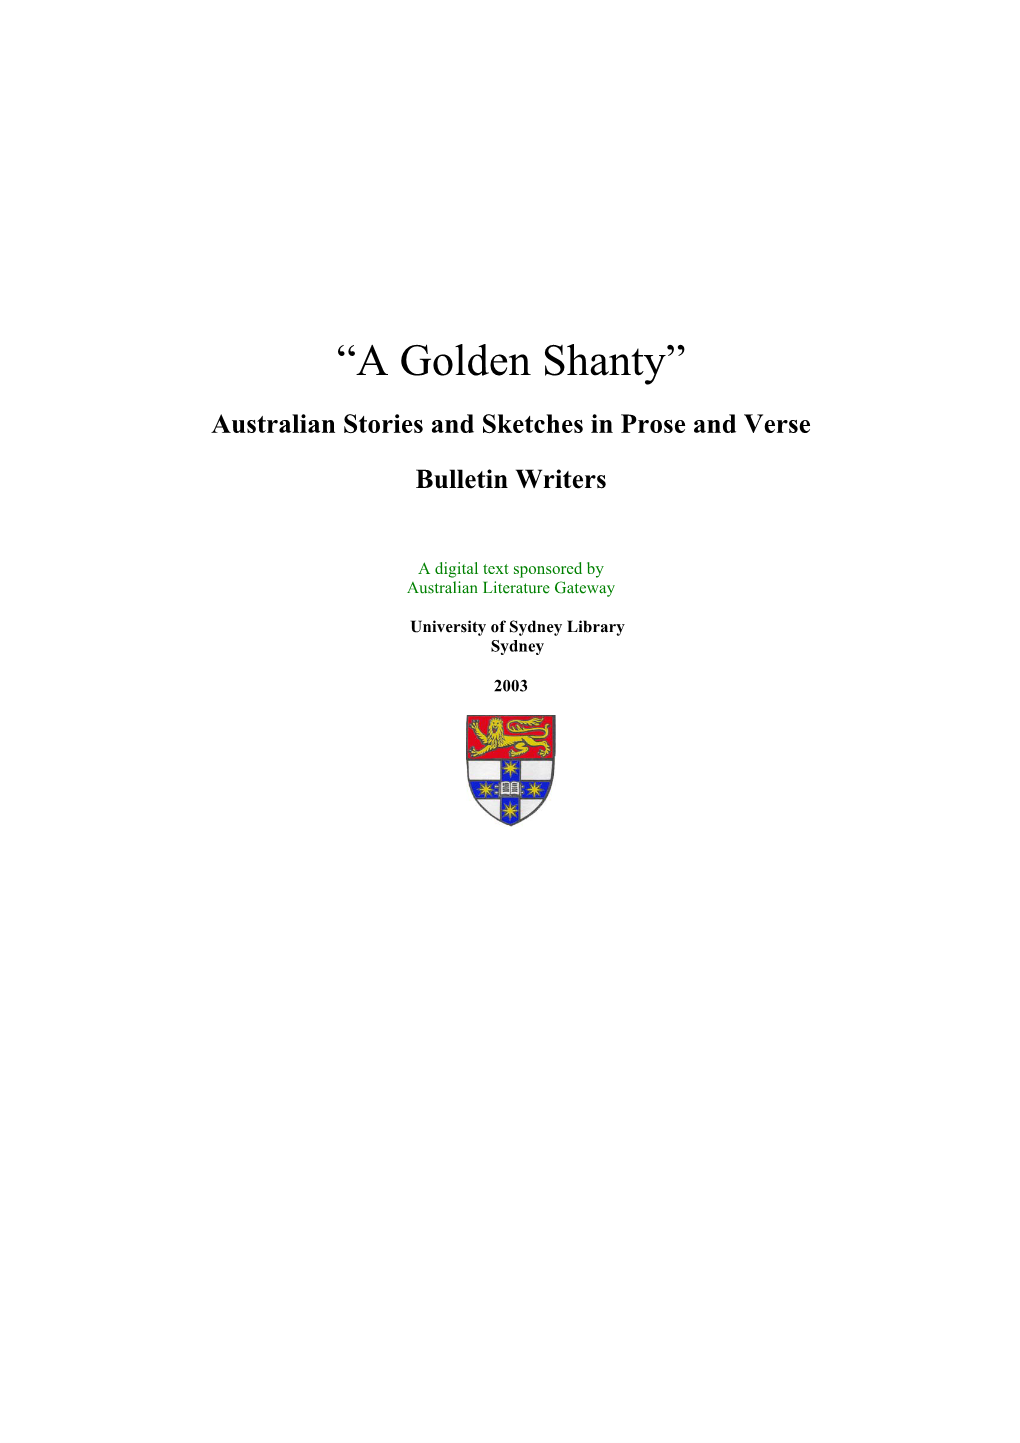 “A Golden Shanty” Australian Stories and Sketches in Prose and Verse